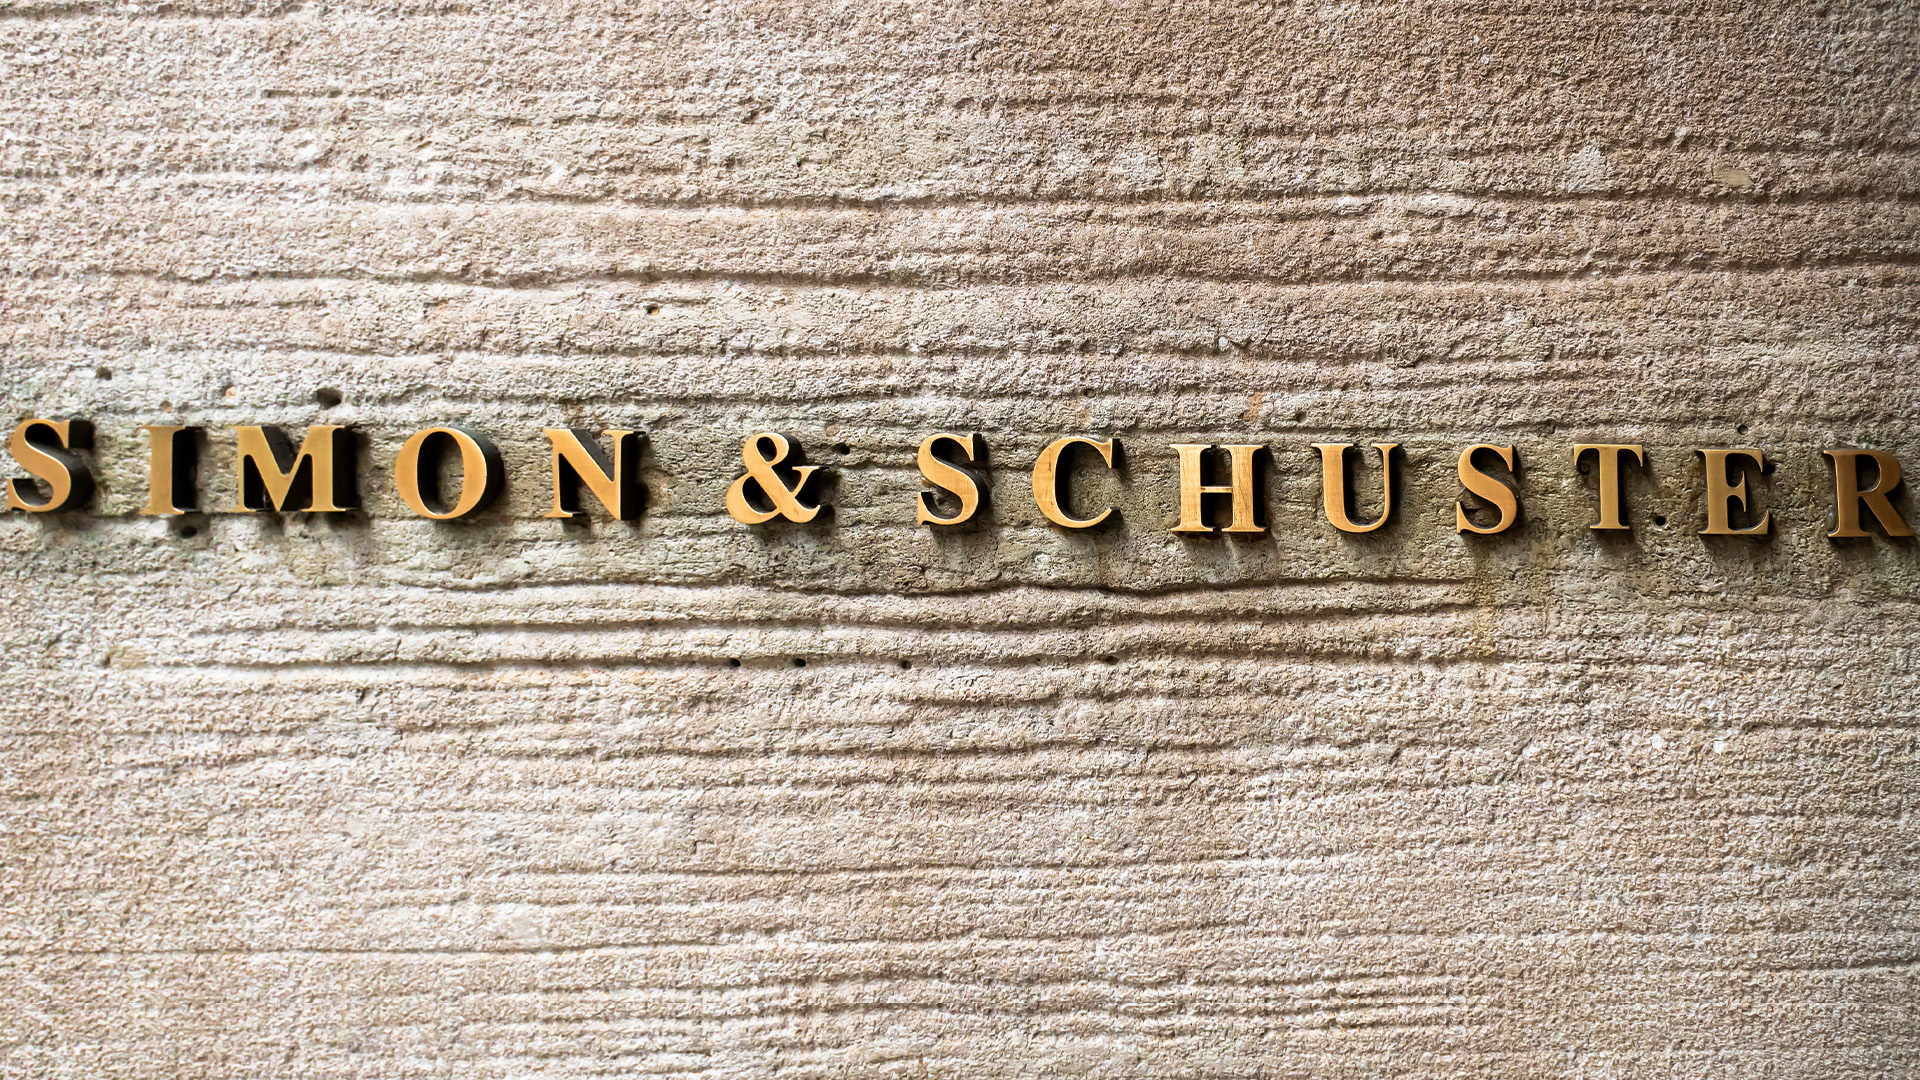 Private equity firm KKR completes acquisition of Simon & Schuster from Paramount